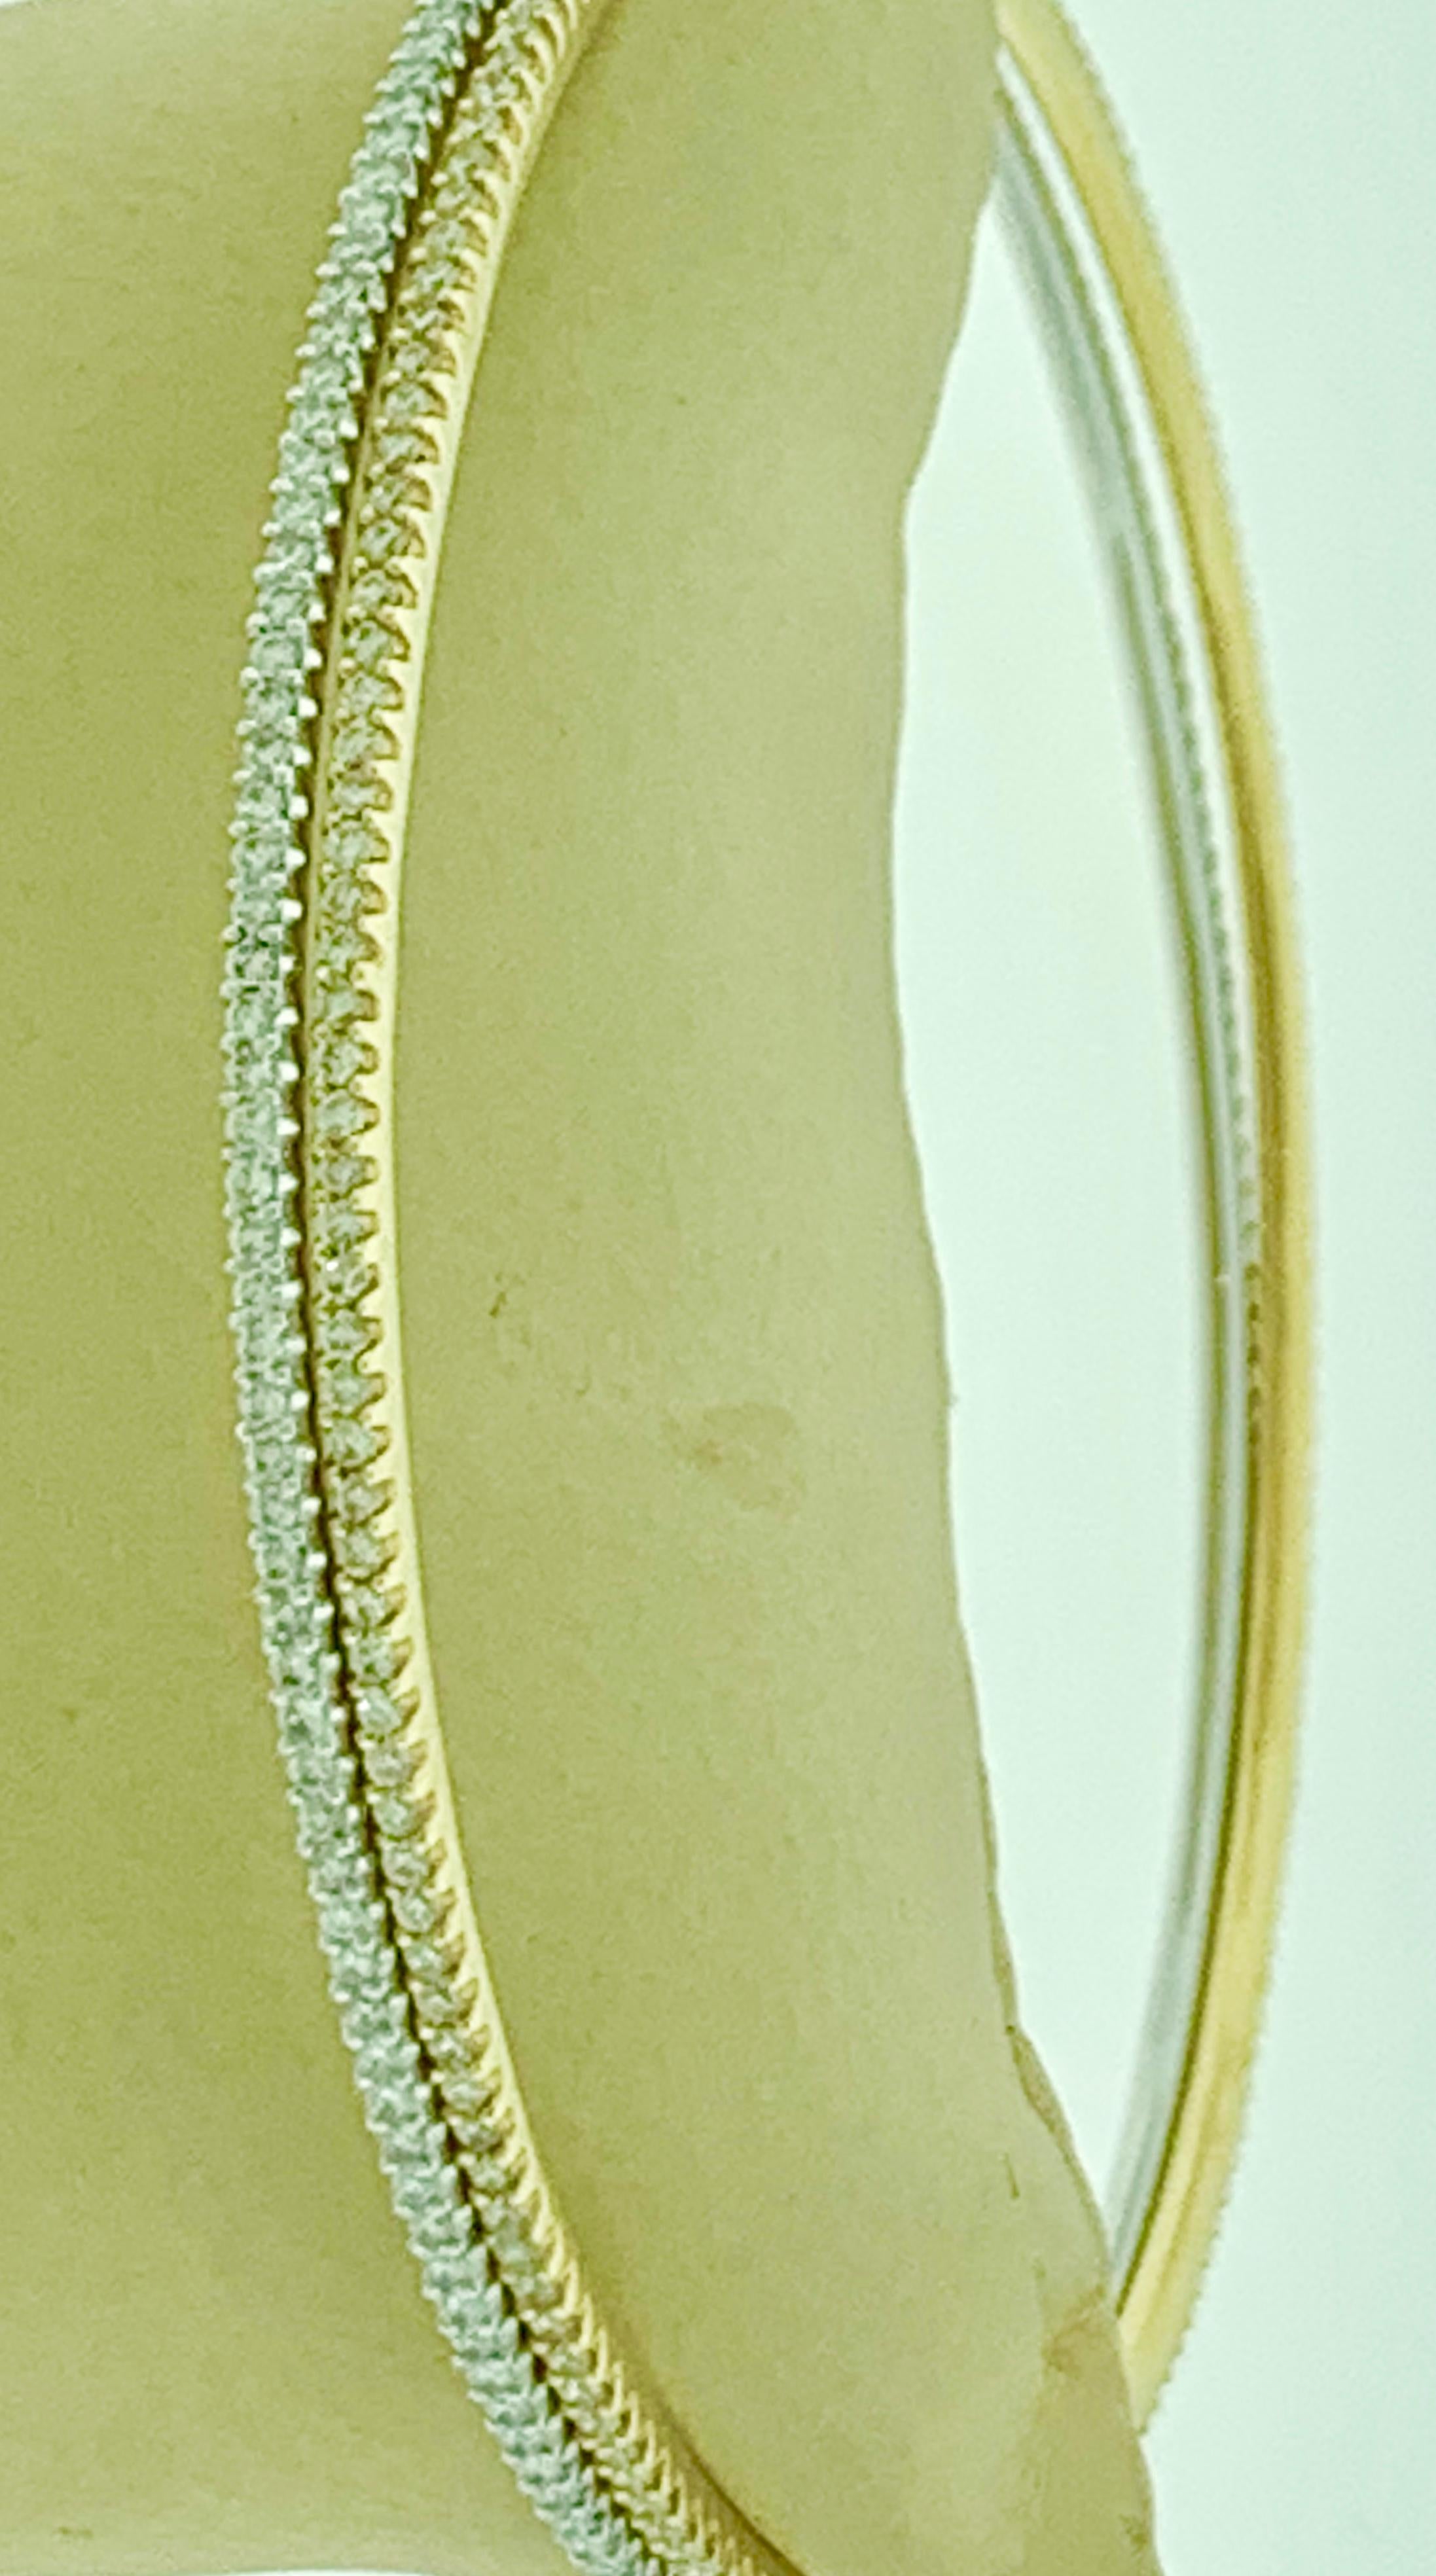 The Tesora Contemporary Yellow & White 18 Karat Gold & Diamond Bangle Bracelet is a beautiful piece of jewelry that is sure to turn heads. It features two bangles that are crafted from 18K Yellow gold and 18K white gold, with approximately 2 Carats